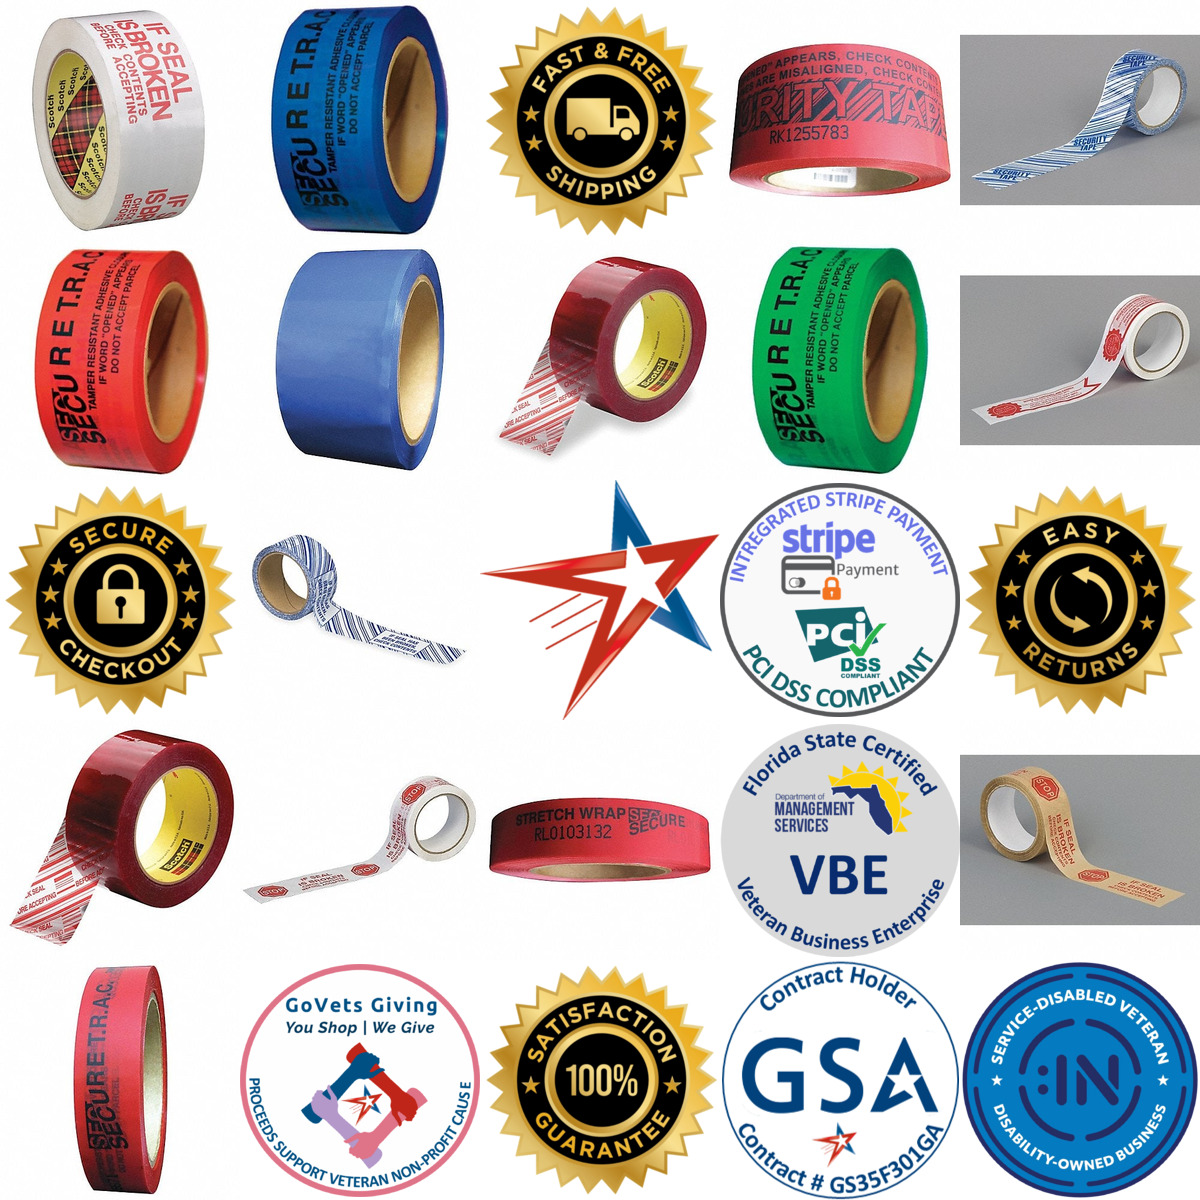 A selection of Tamper Evident Tape products on GoVets